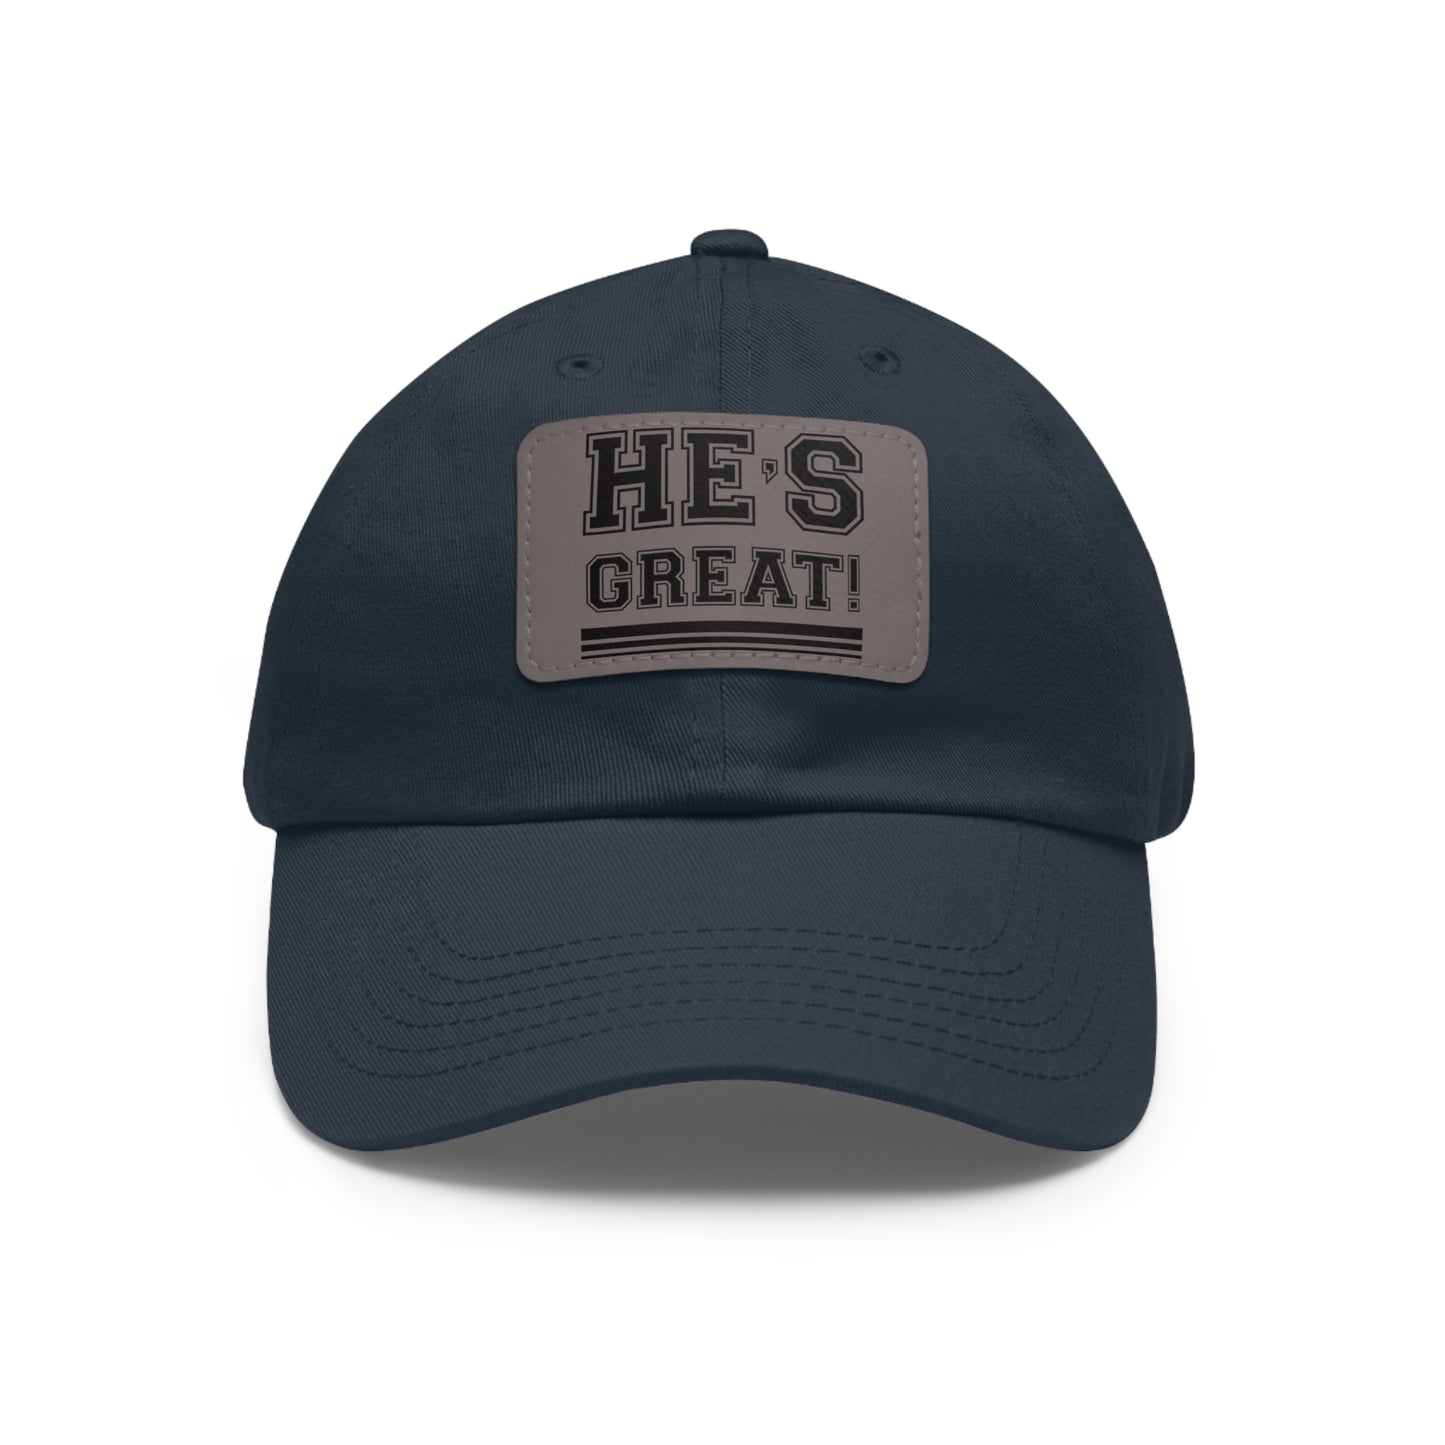 HE'S GREAT - LEATHER PATCH CAP